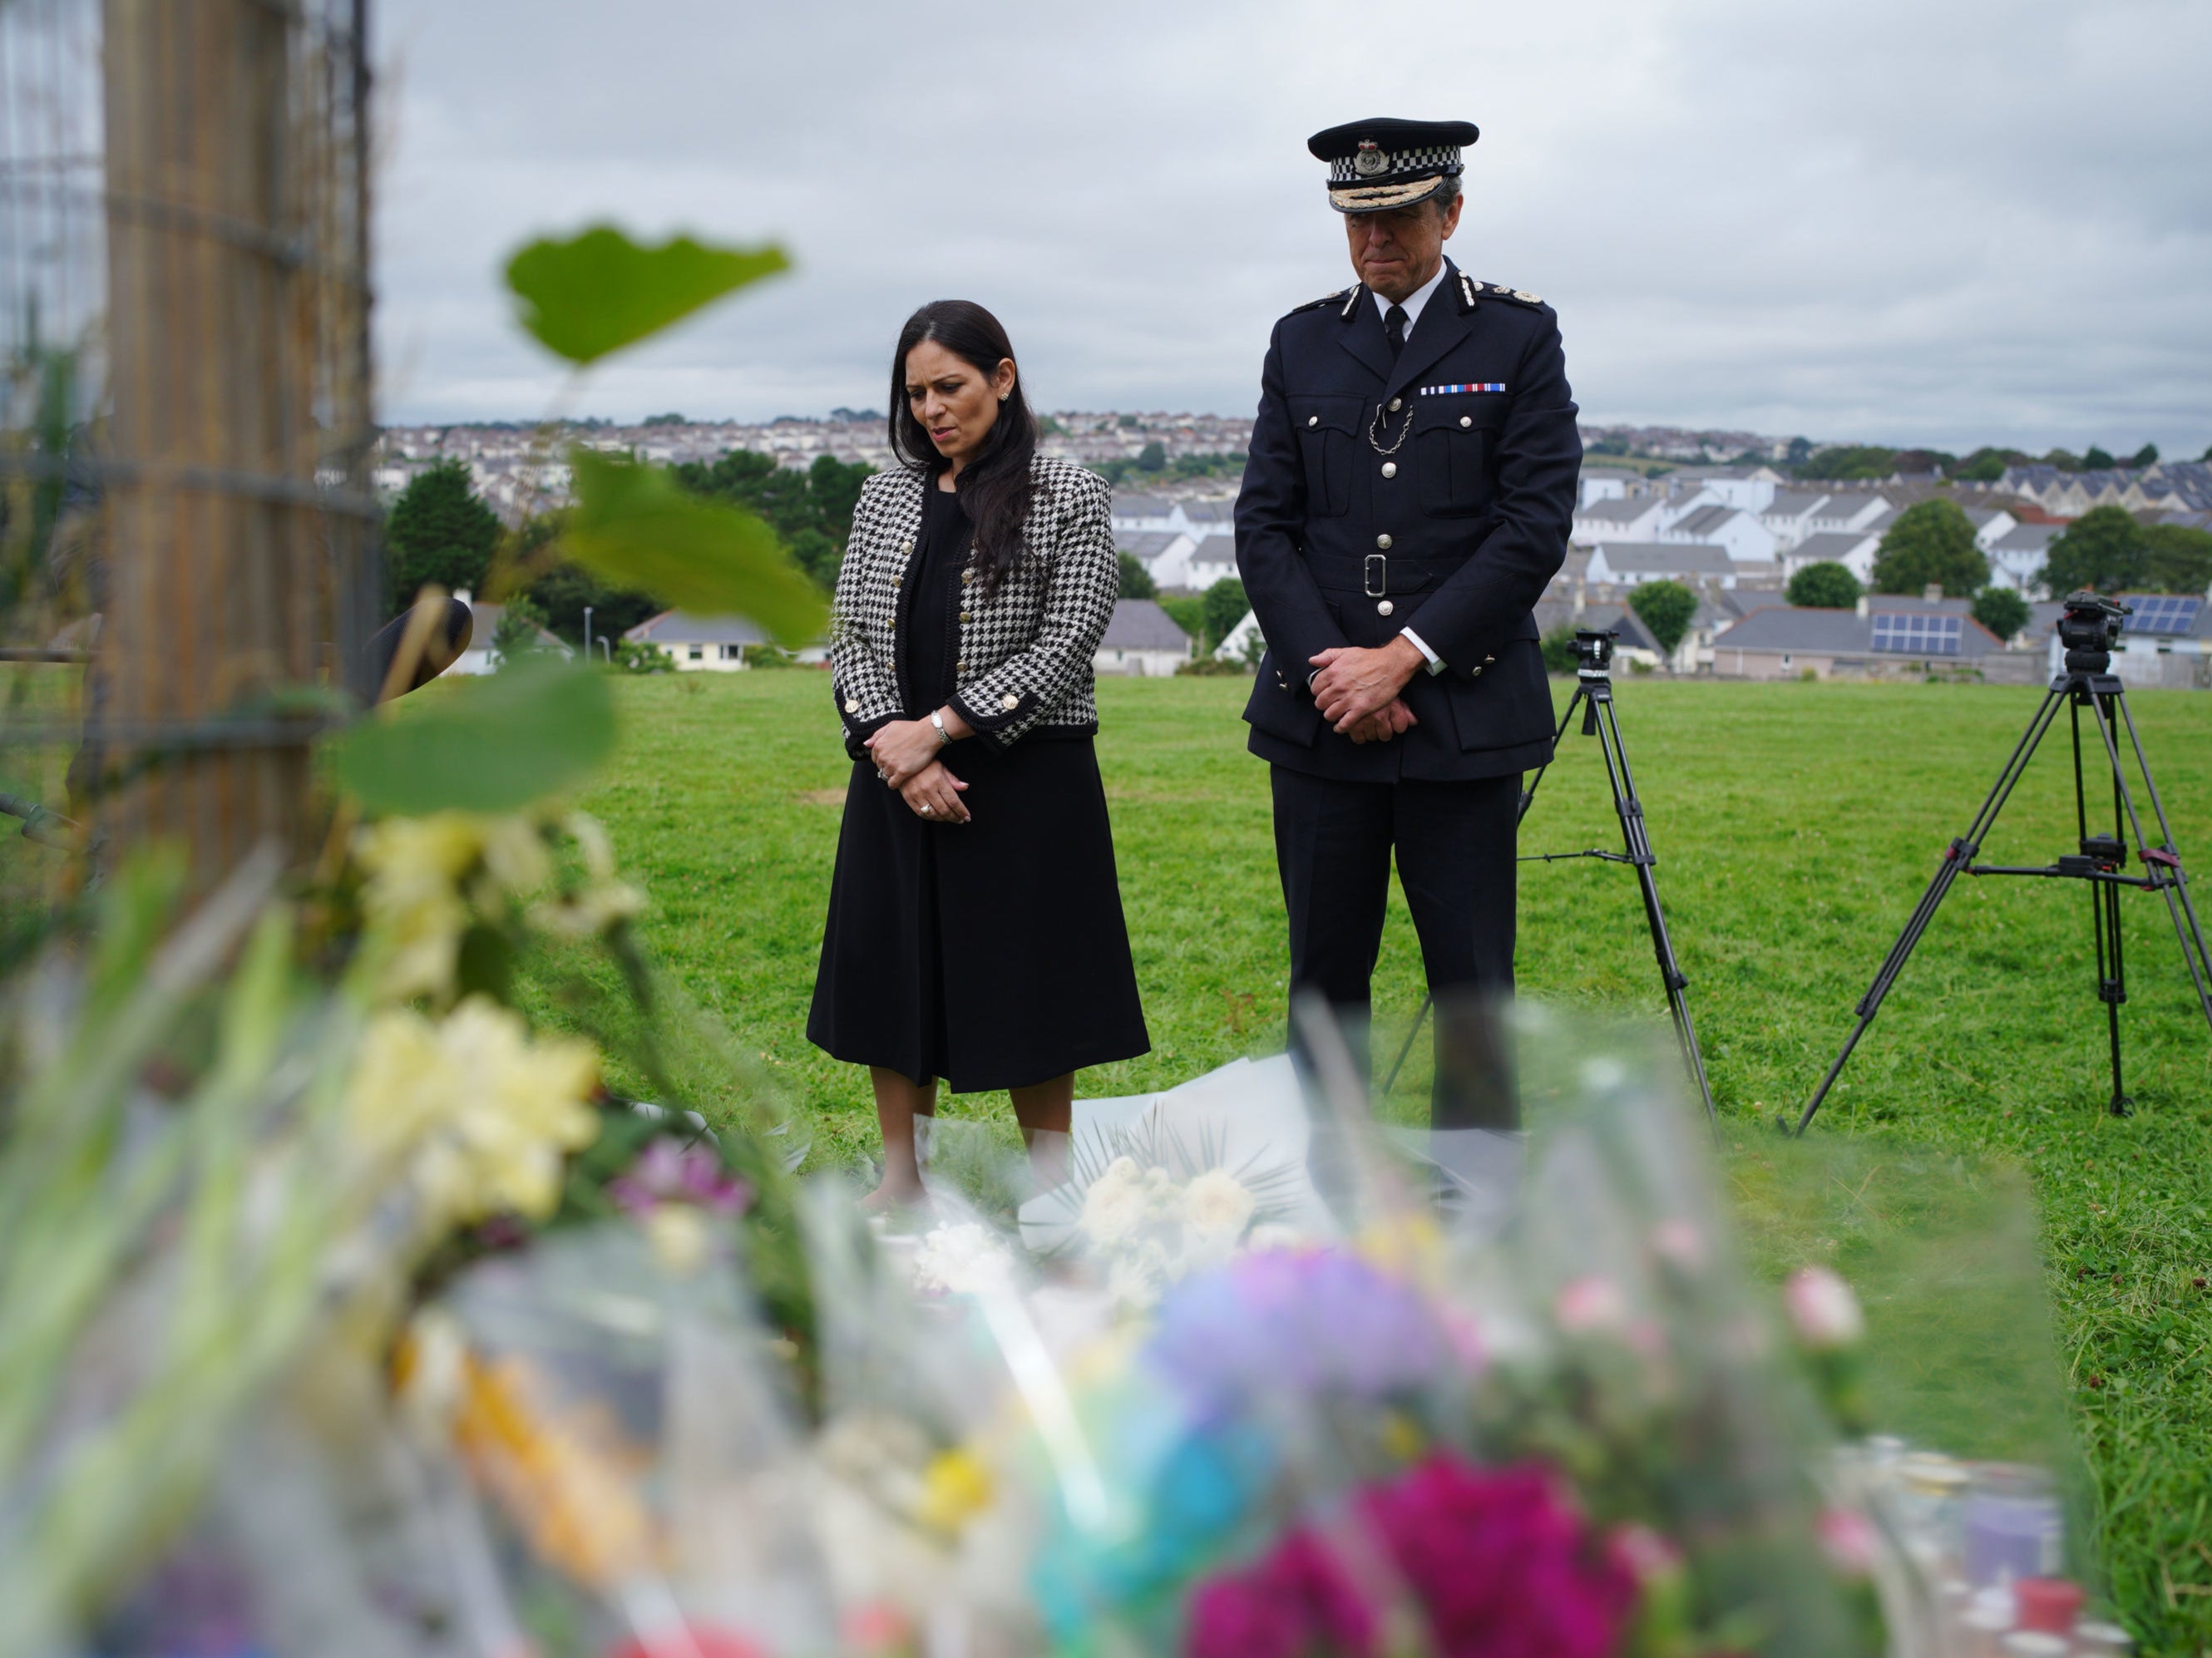 Home Secretary Priti Patel and Chief Constable of Devon and Cornwall Police, Shaun Sawyer, visiting the tributes in Plymouth, Devon